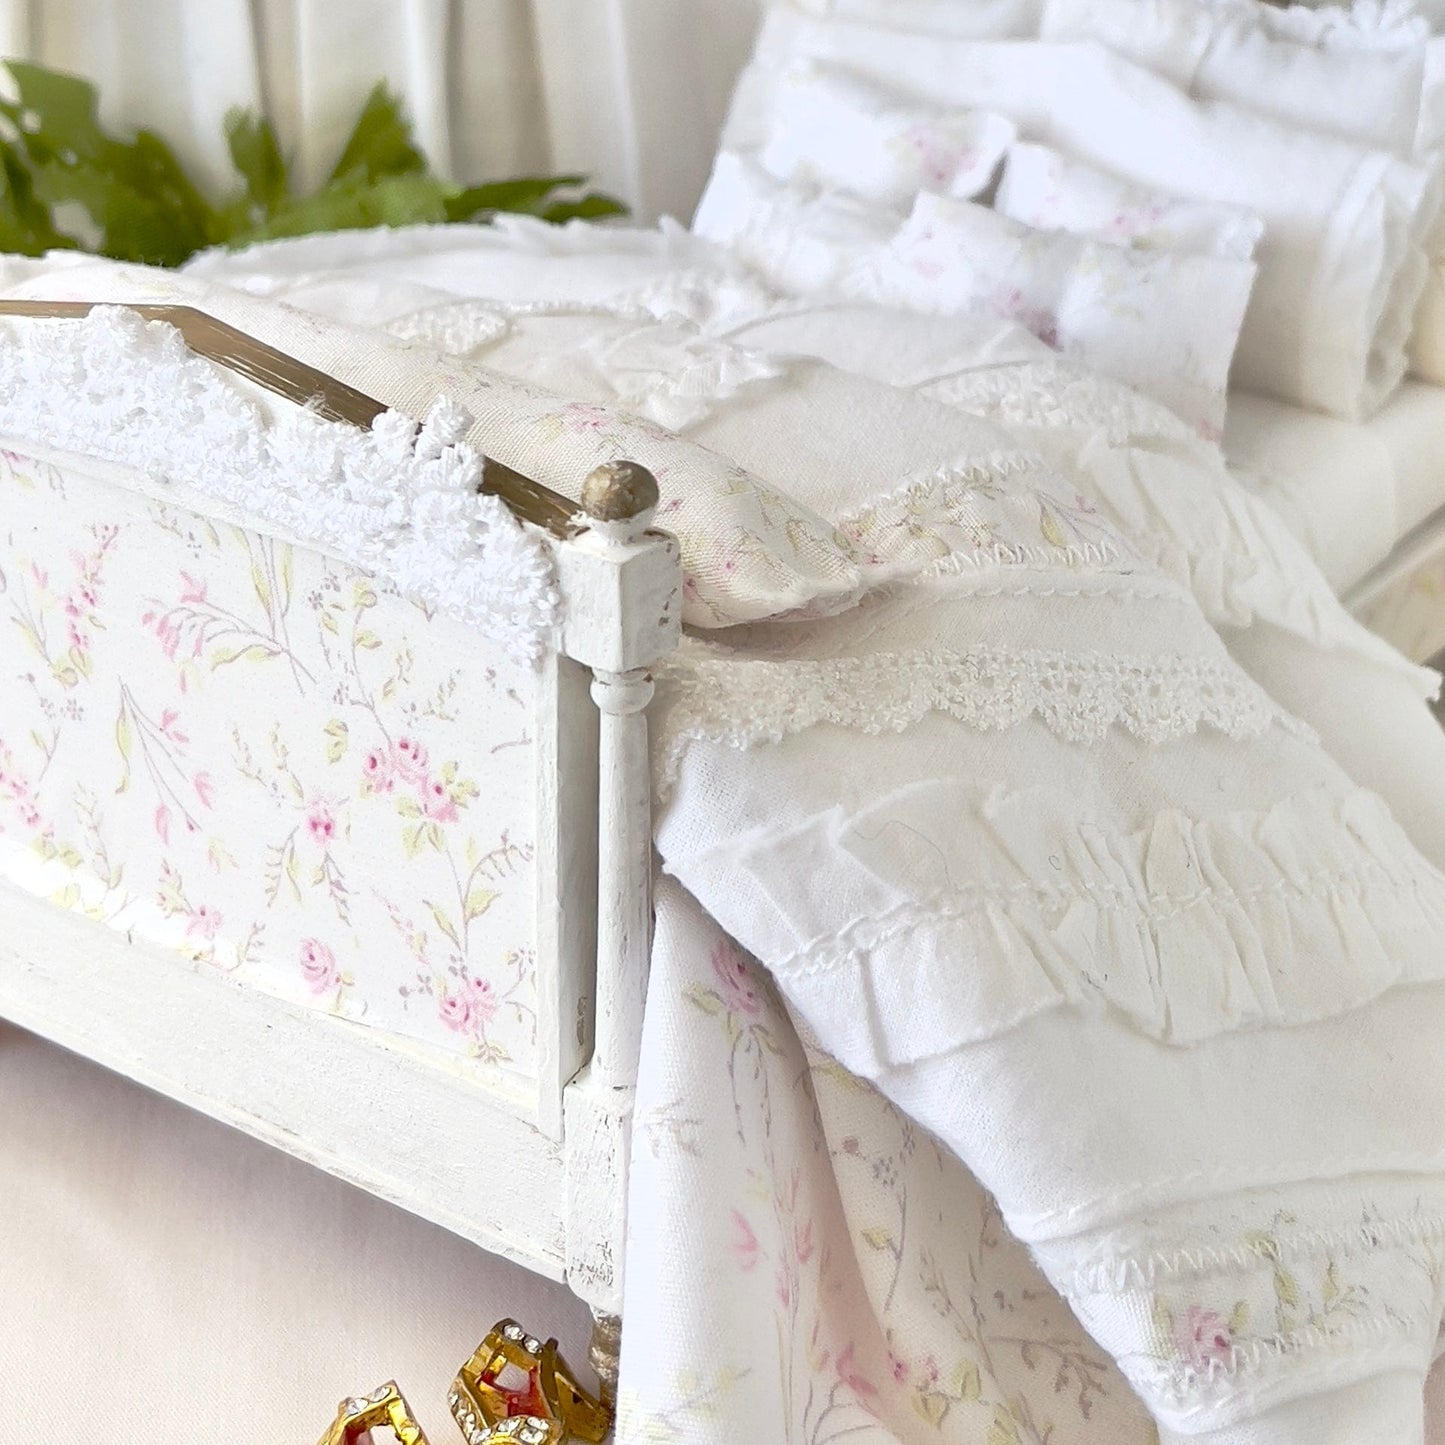 Chantallena Doll House Camila| Decoupage Shabby Pink Wildflowers Wooden Bed with Lace Accents